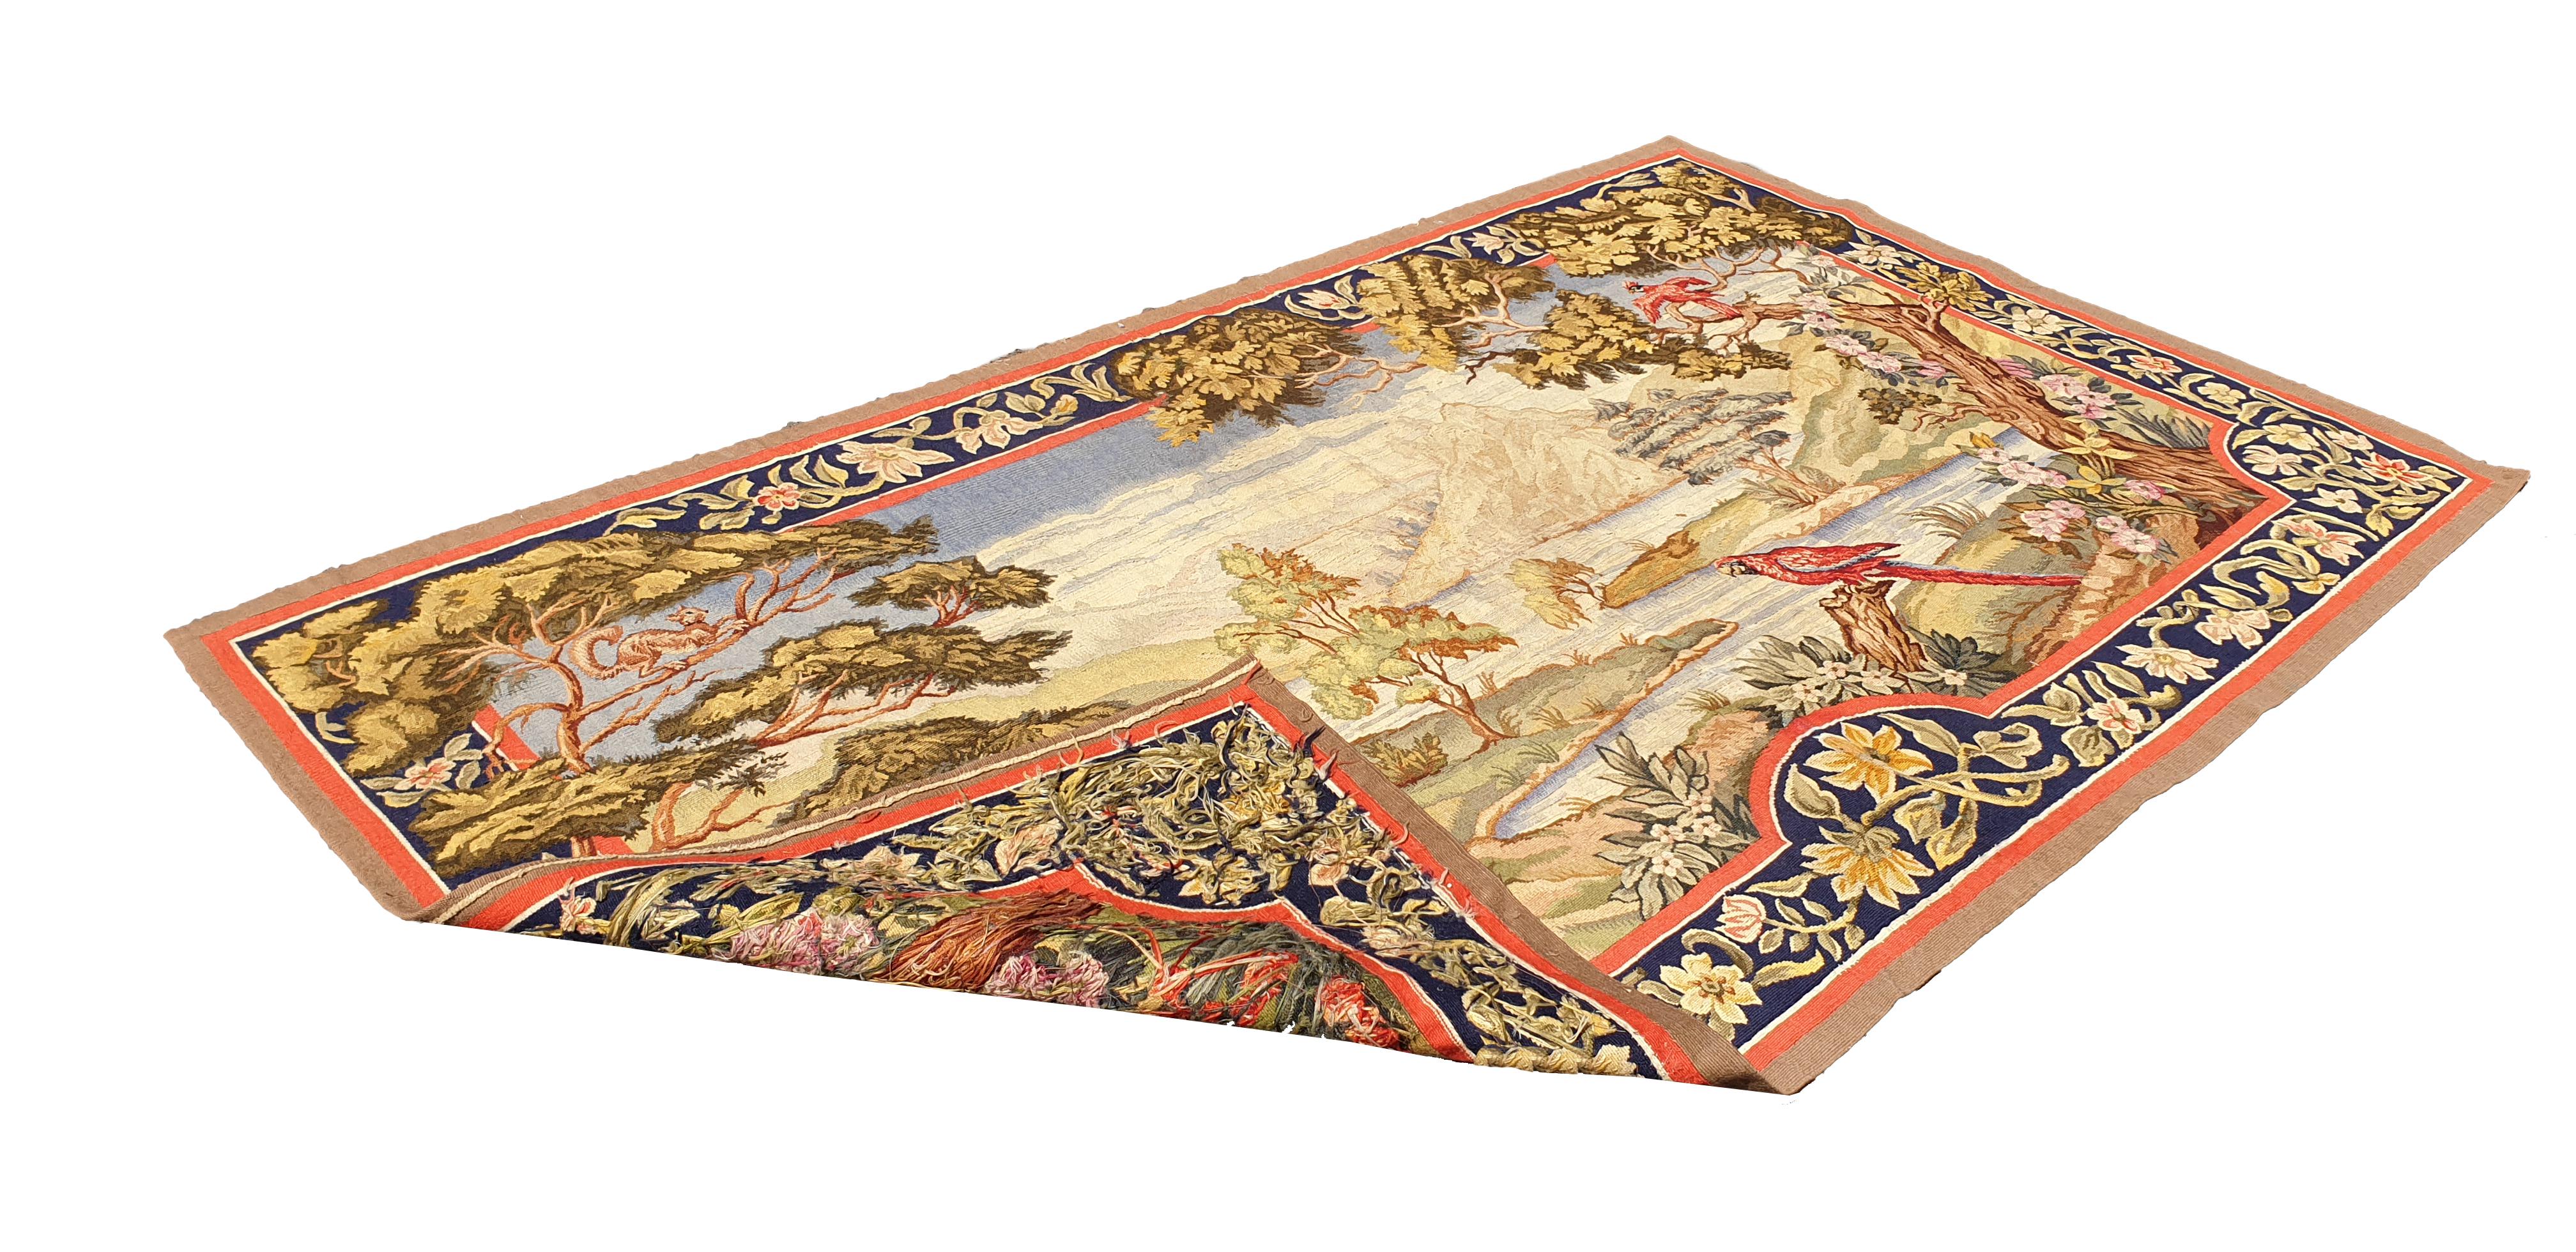 Wool Aubusson French Antique Tapestry, 19th Century